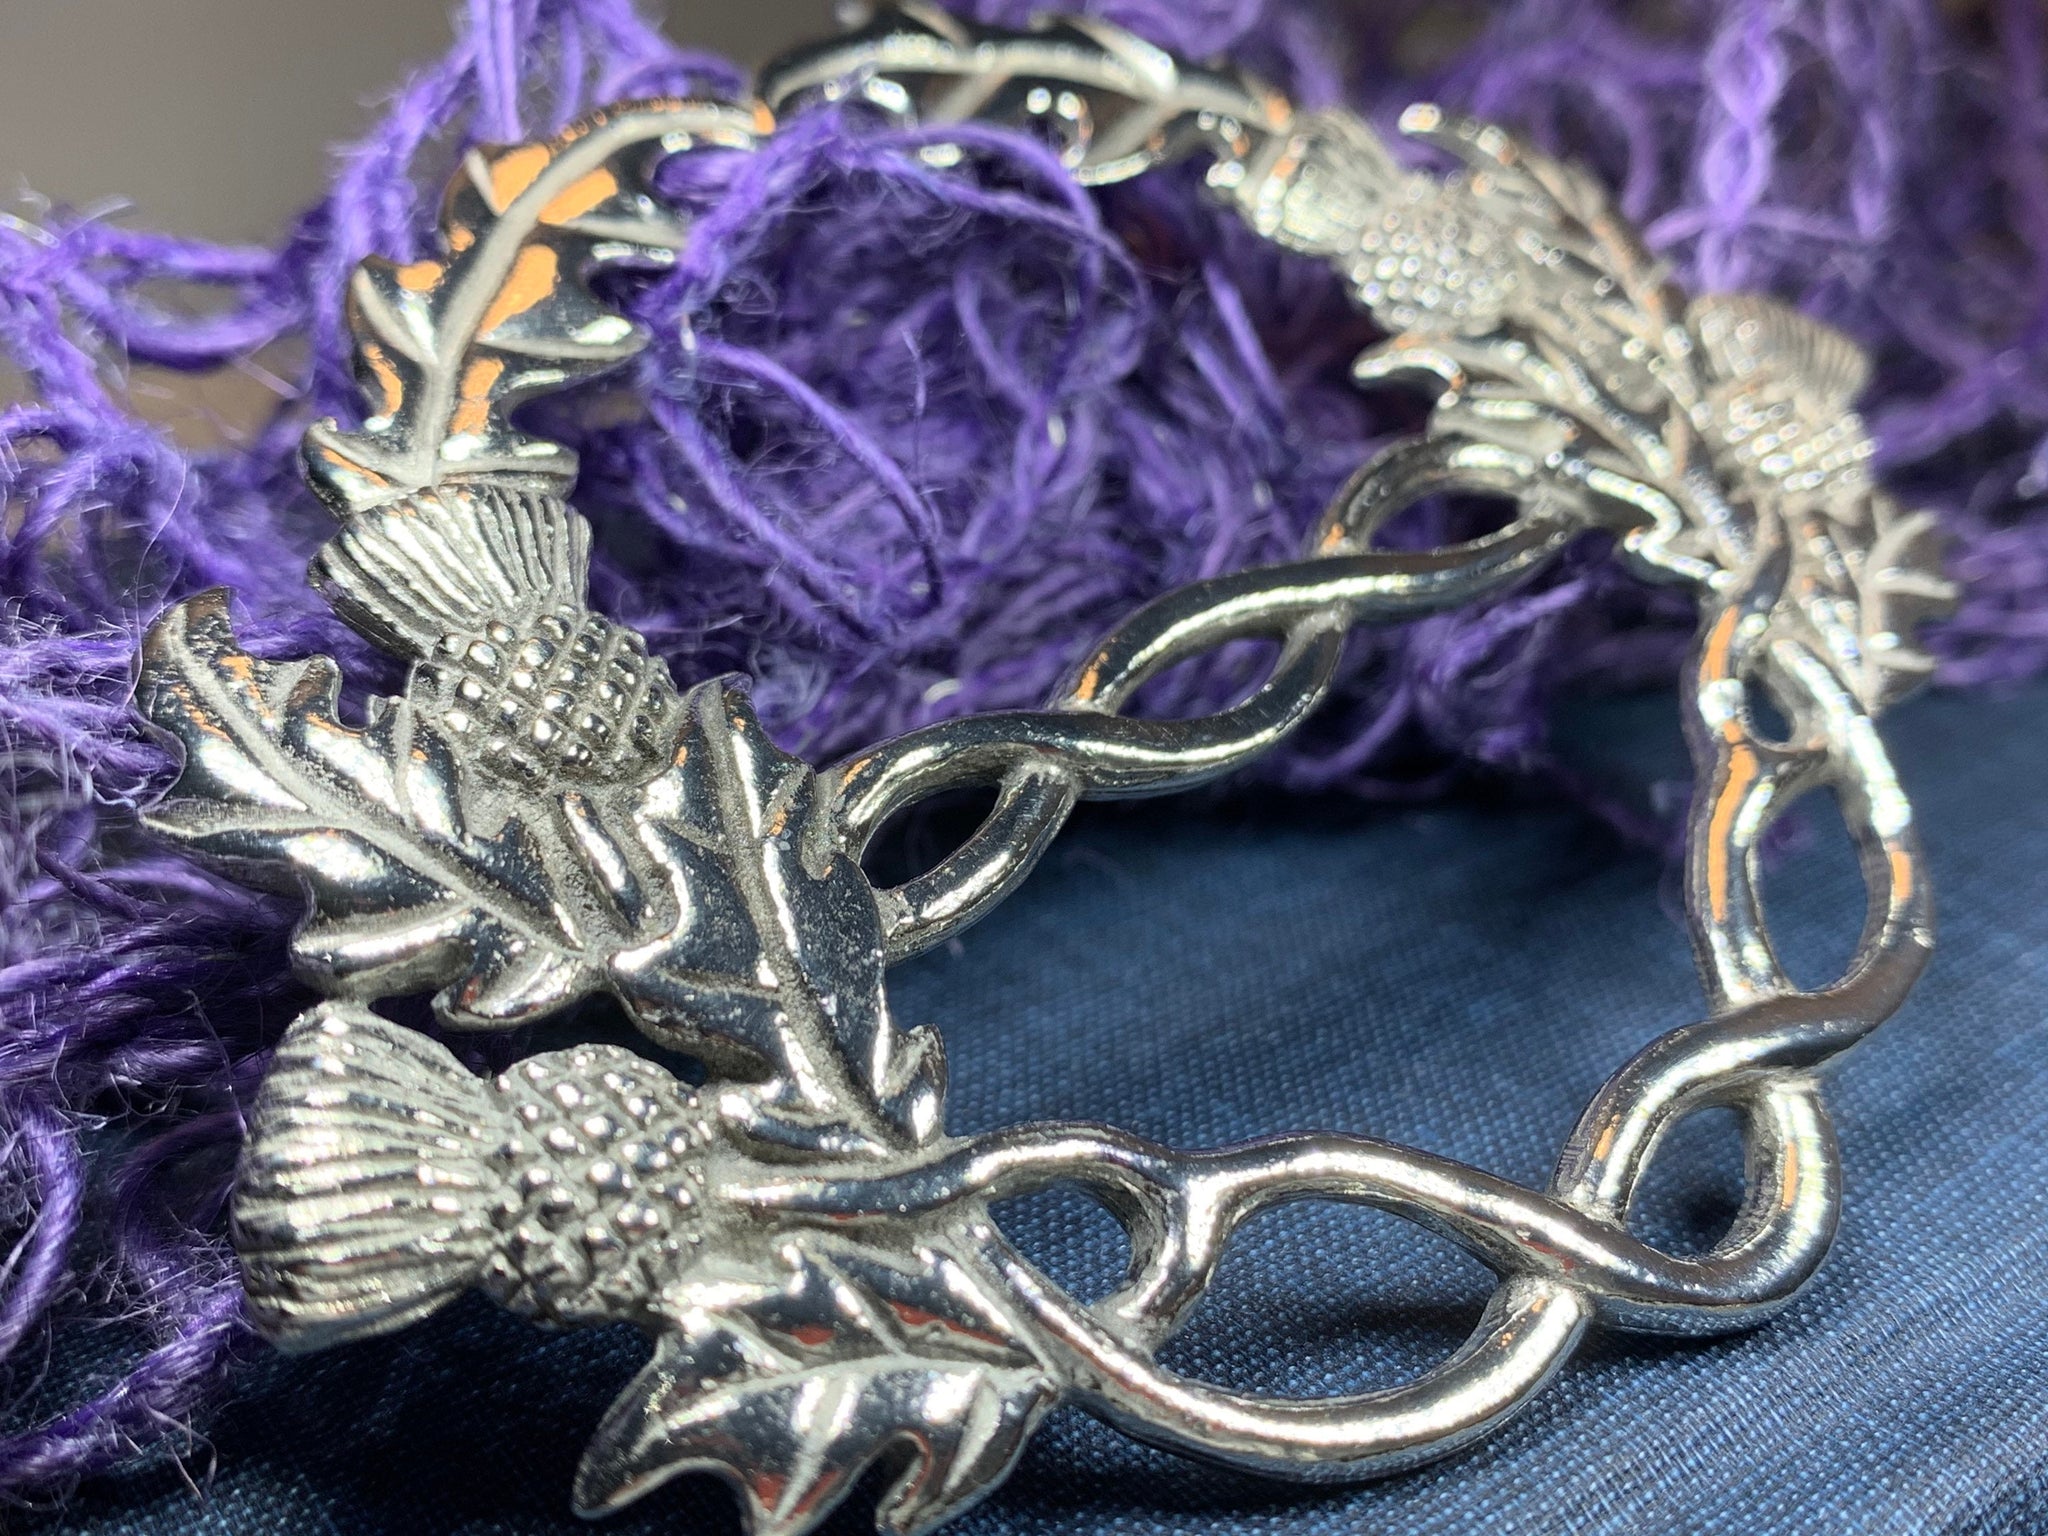 Celtic Crystal Design Jewelry Thistle Scarf Ring